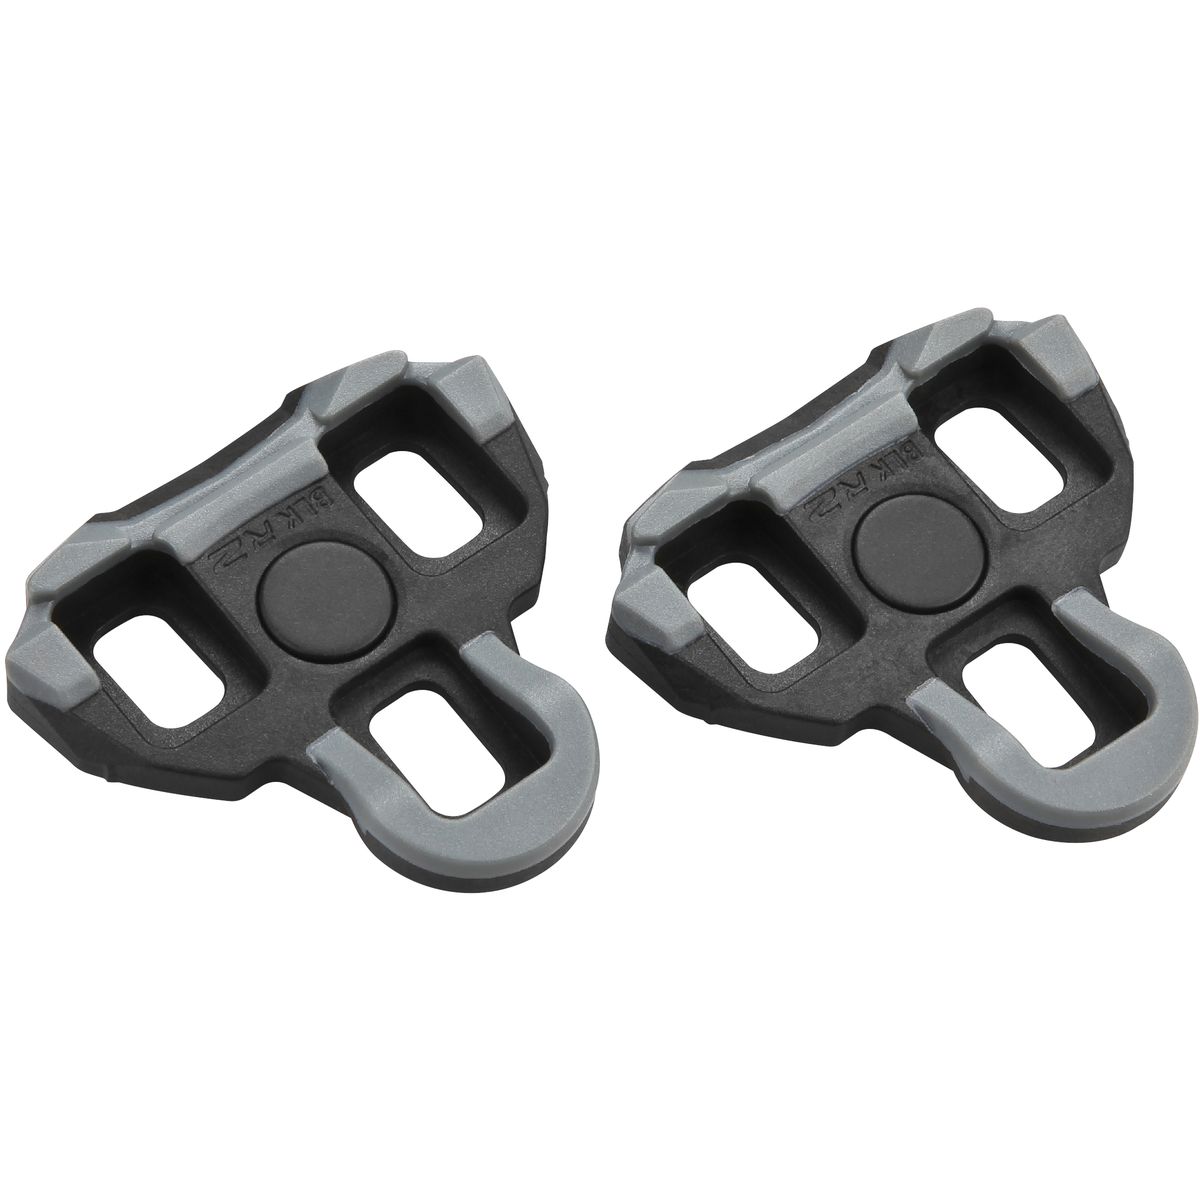 Garmin Vector Replacement Cleat 0 Degree Float